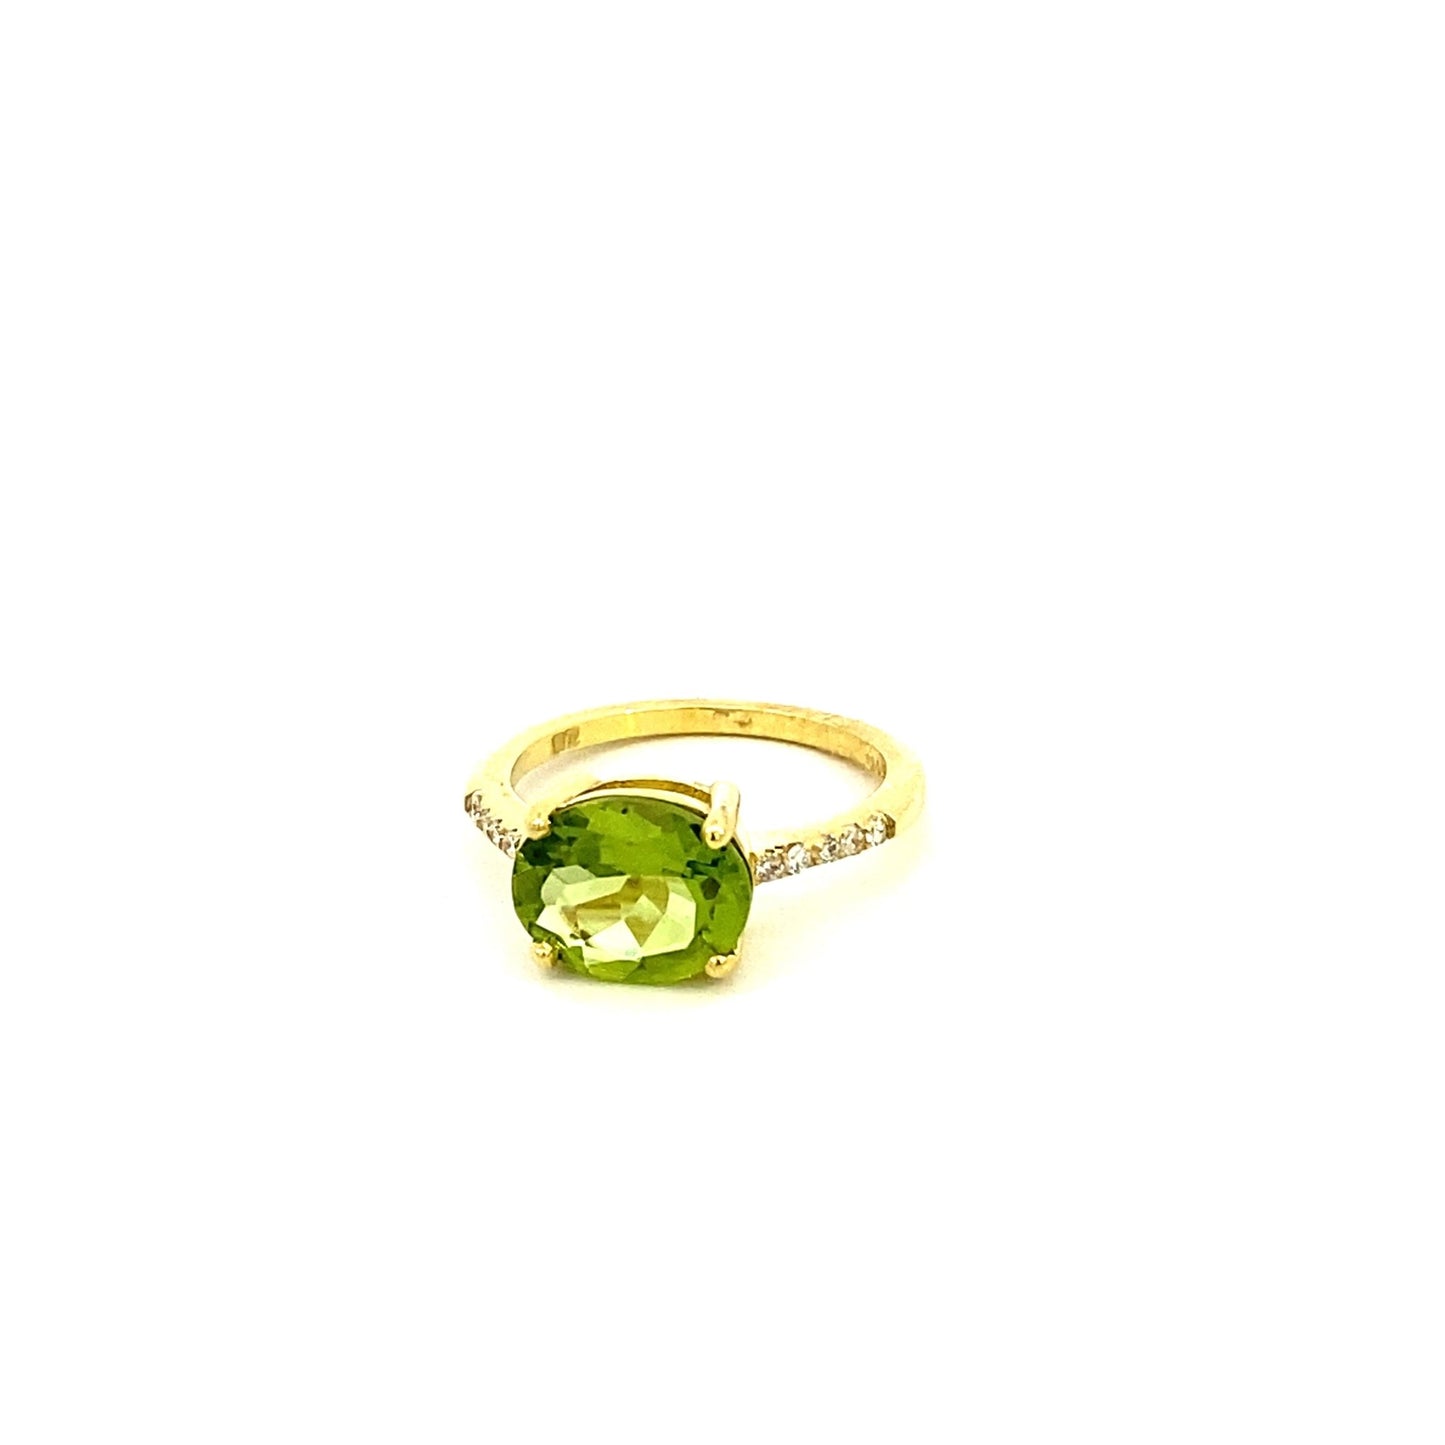 Ring oval peridot with diamond shank - Gaines Jewelers